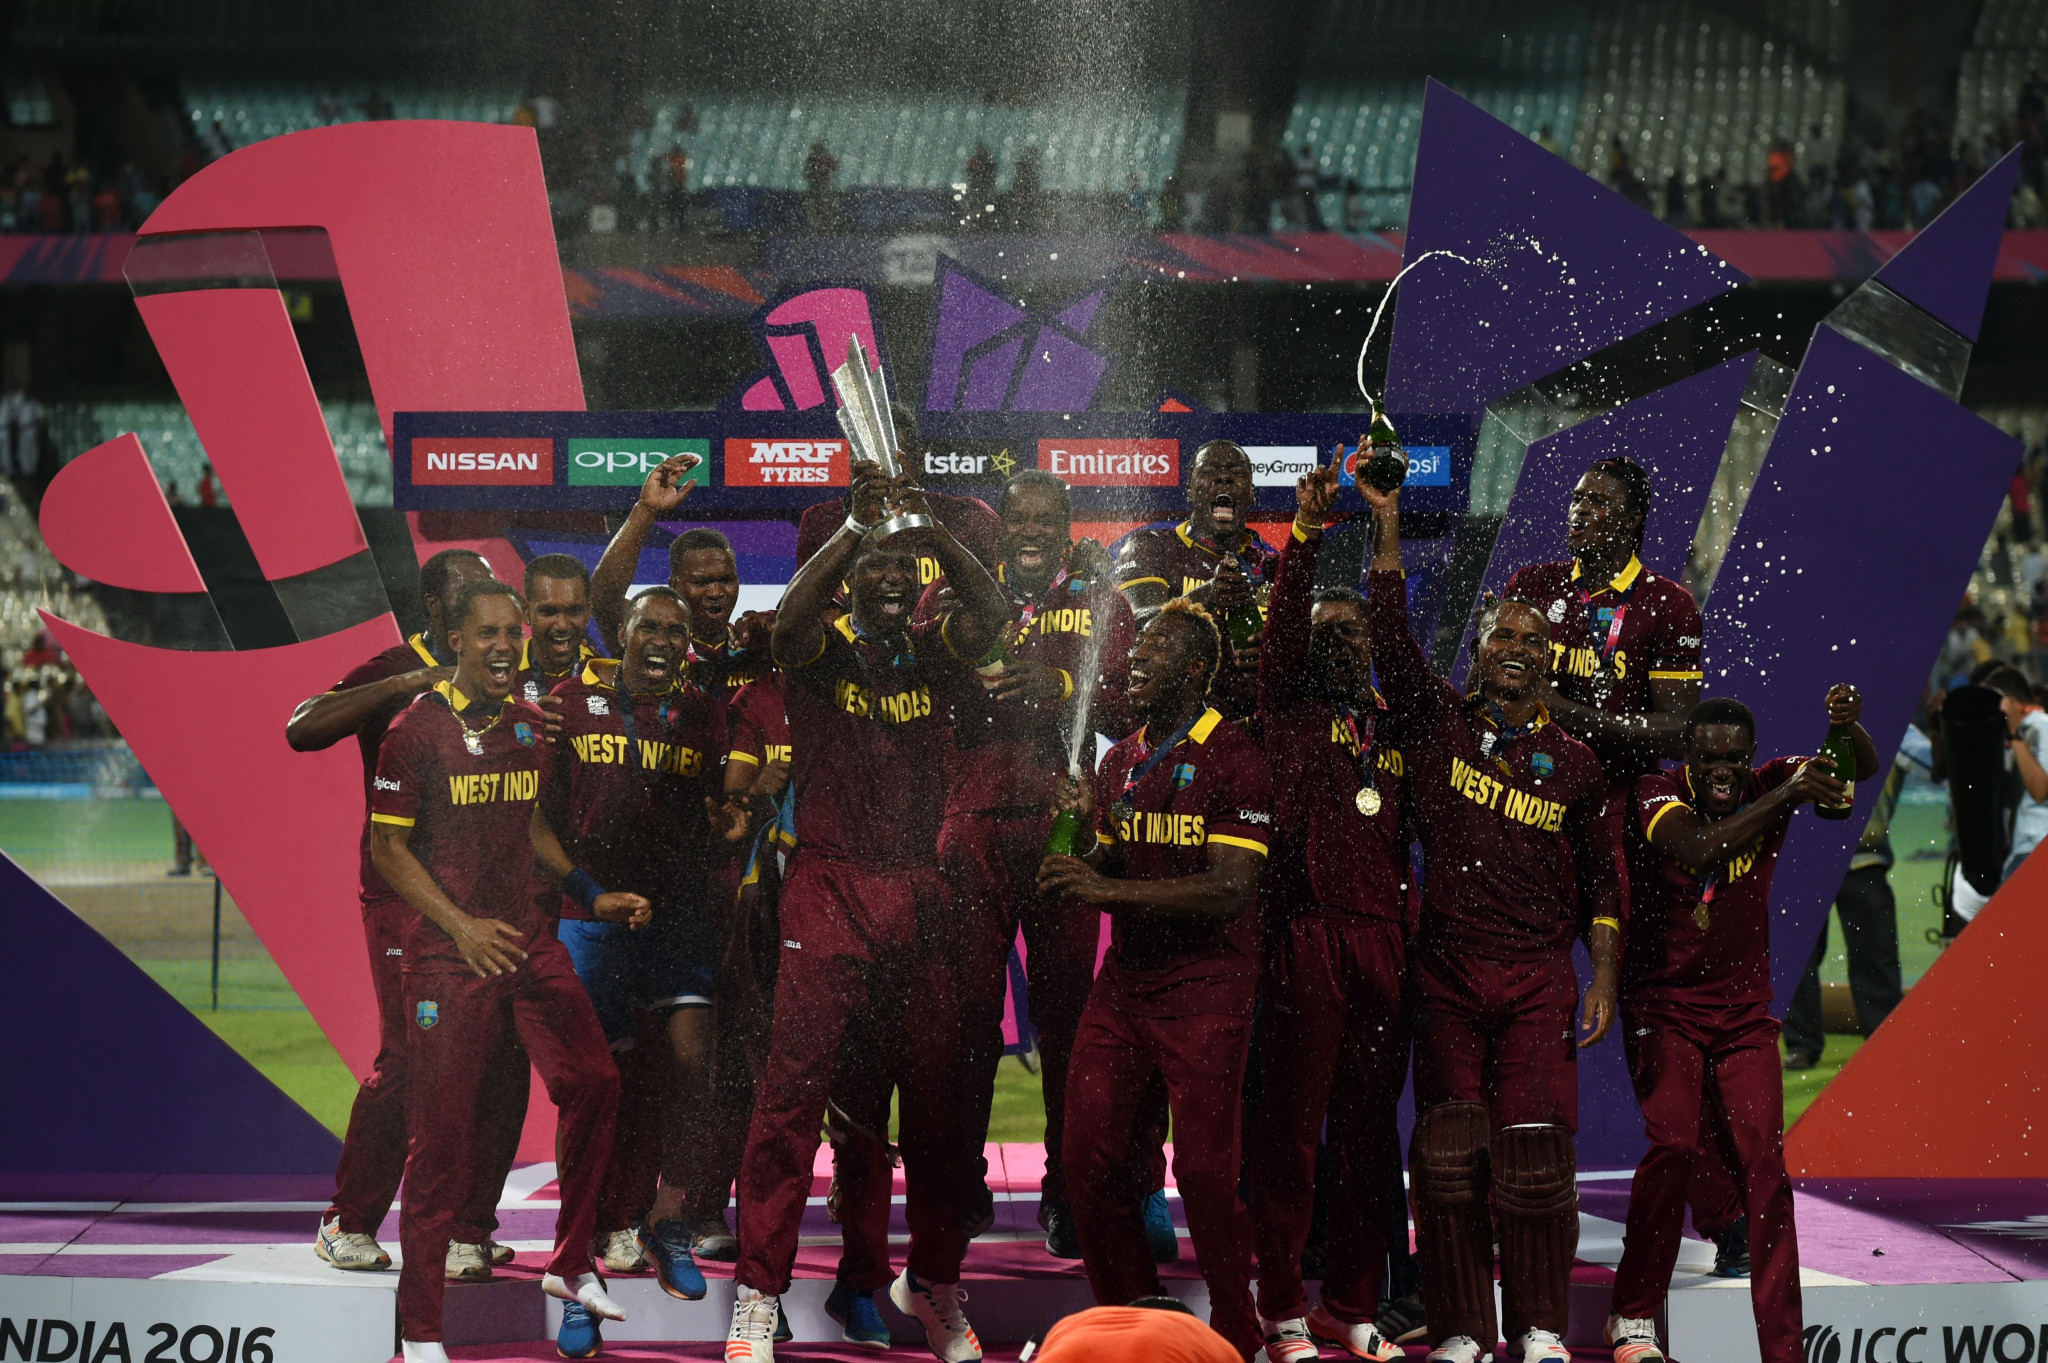 The West Indies won the ICC Men's T20 World Cup in 2016 and are now pushing to host the competition alongside USA Cricket ©Getty Images